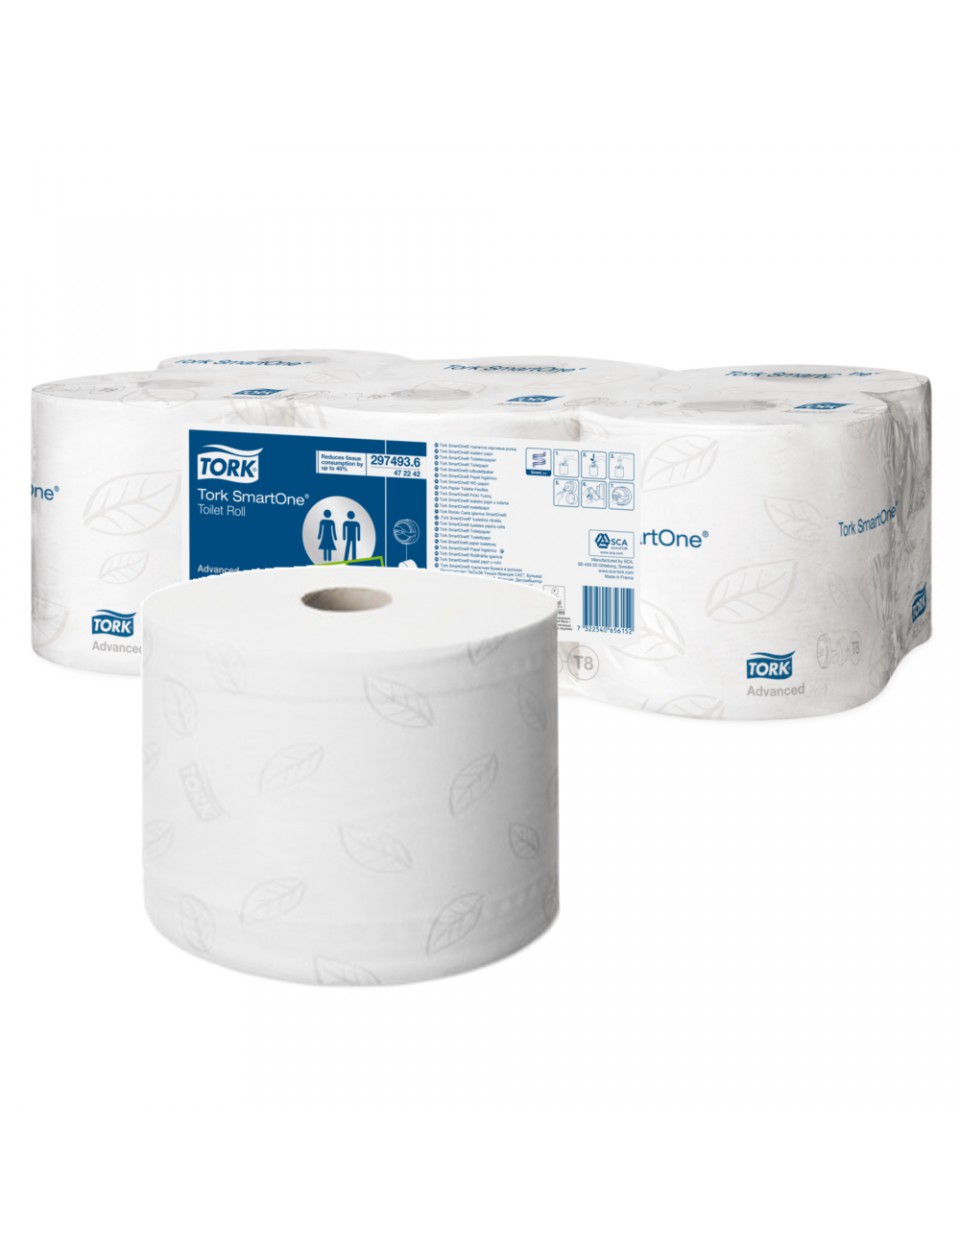 The Tork Smart-One 472242 Toilet Rolls – Pack of 6